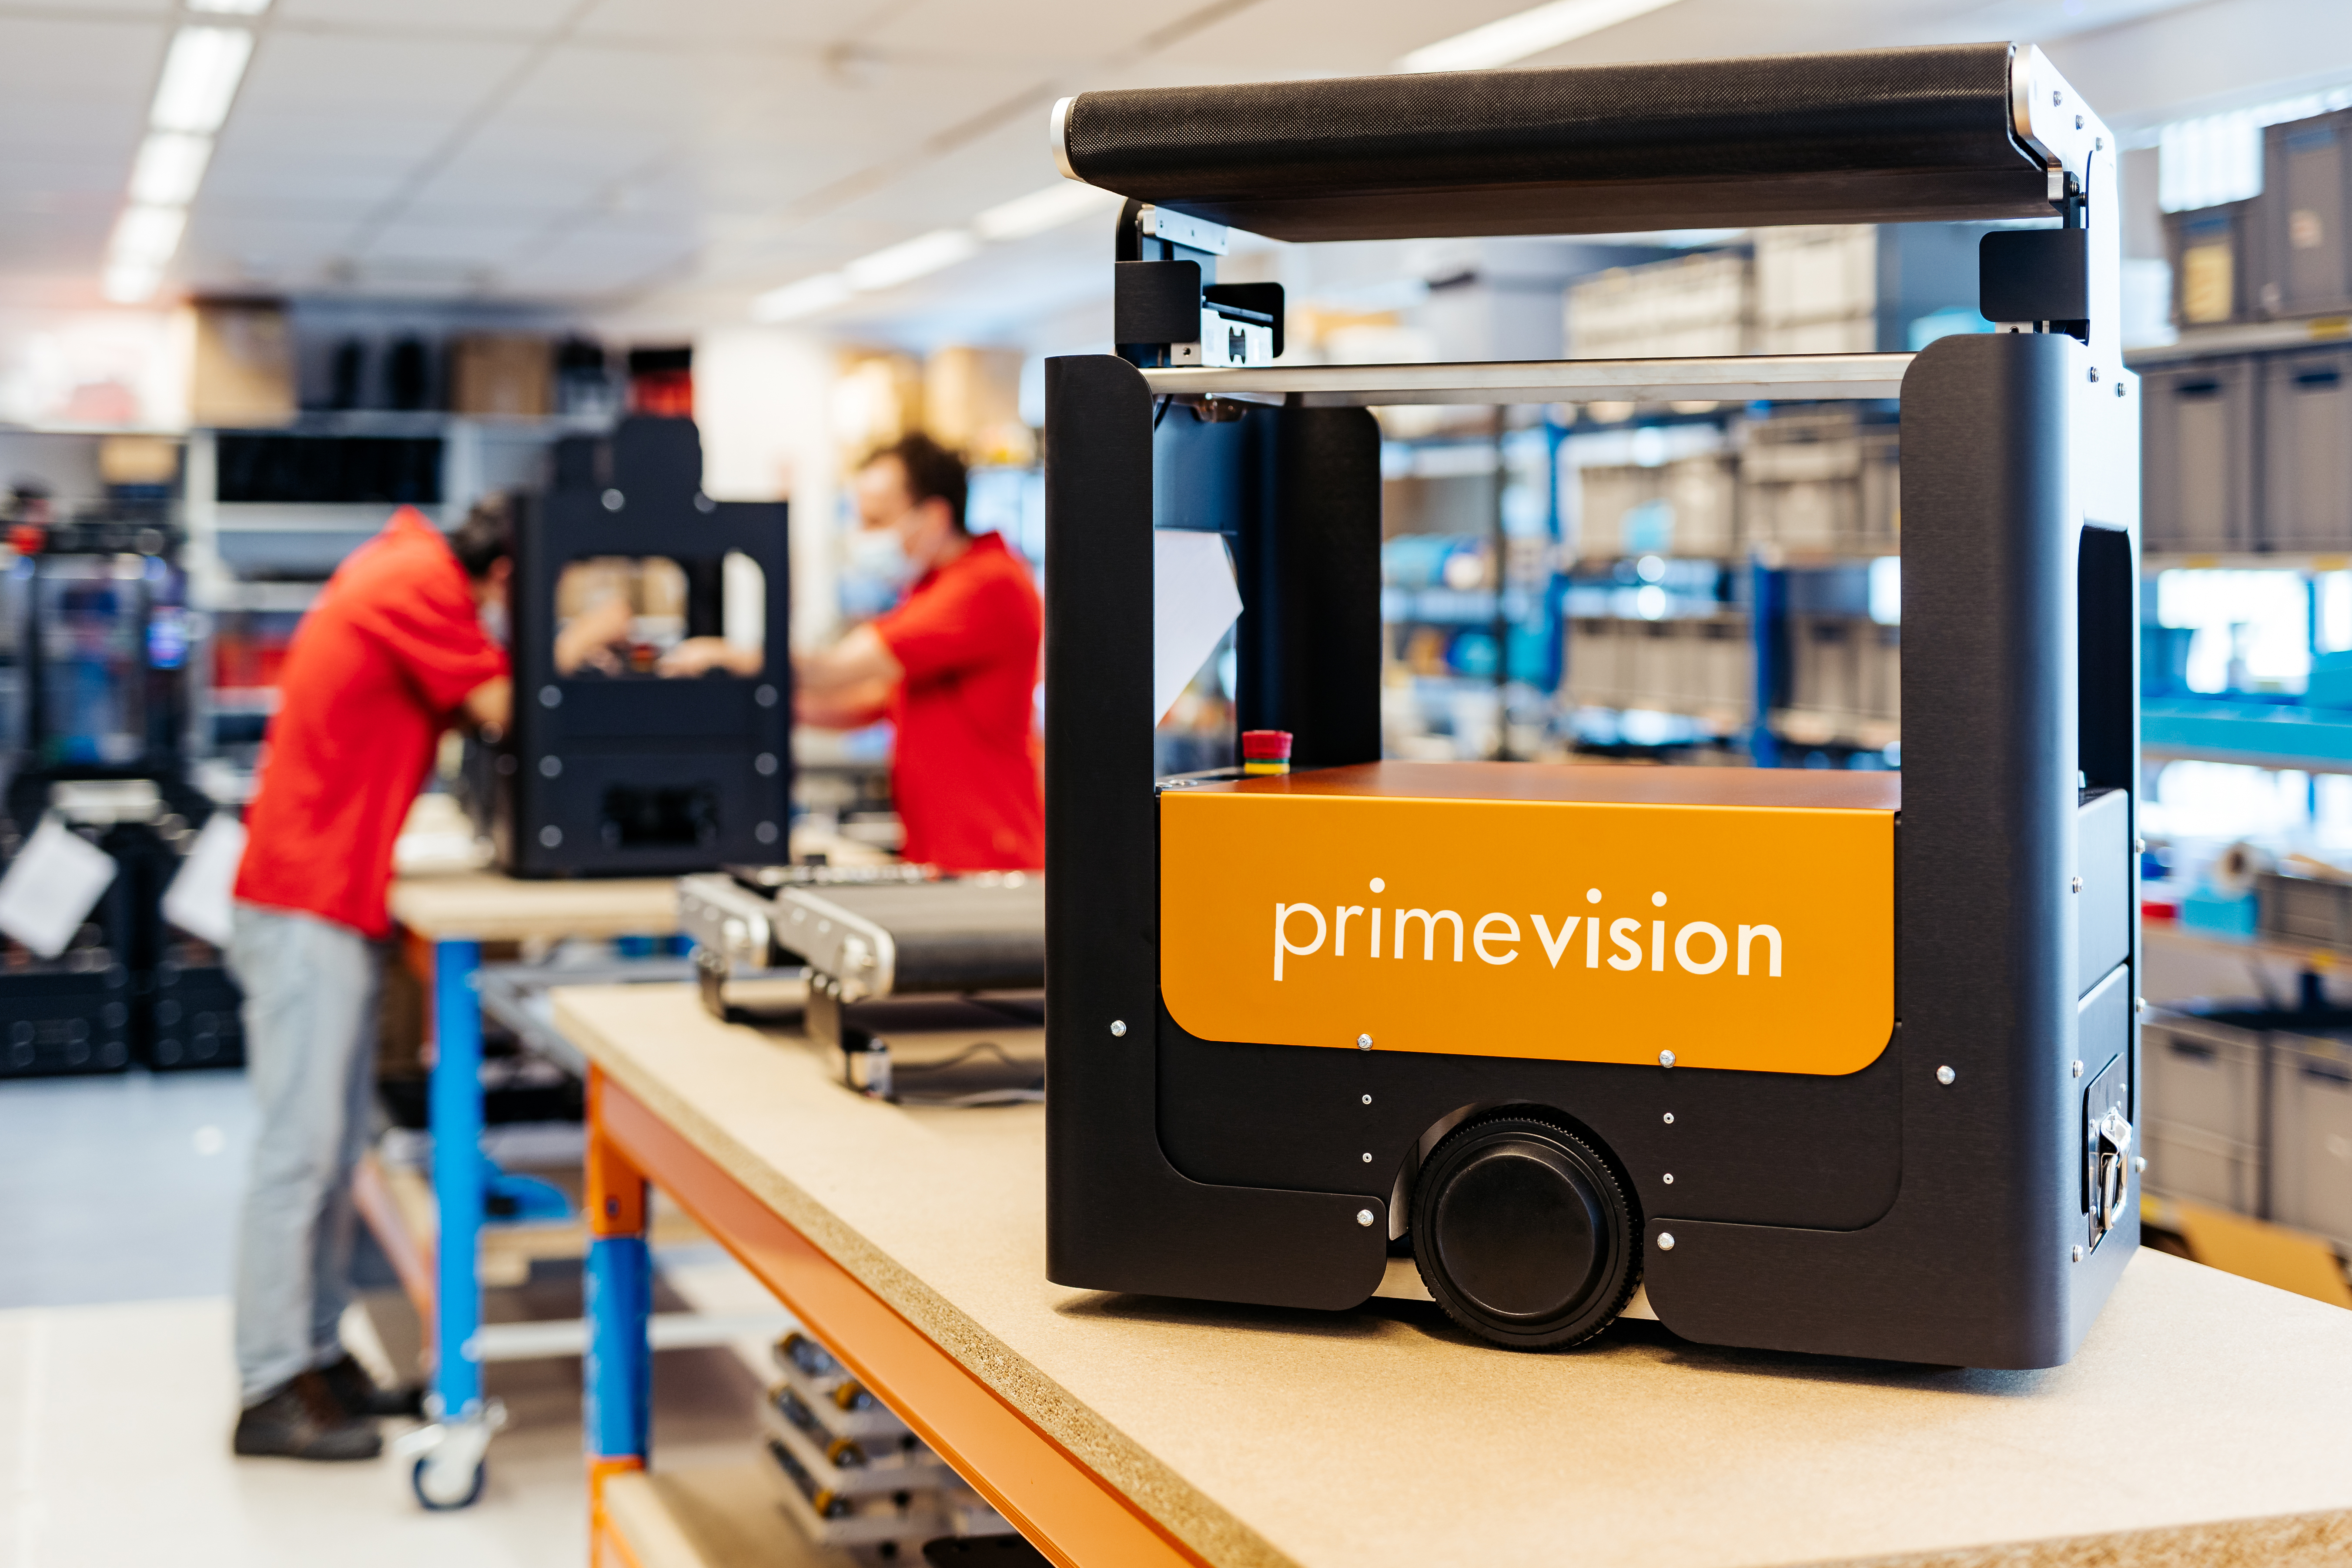 Prime Vision’s robotic systems can carry parcels from 100 g to 35 kg